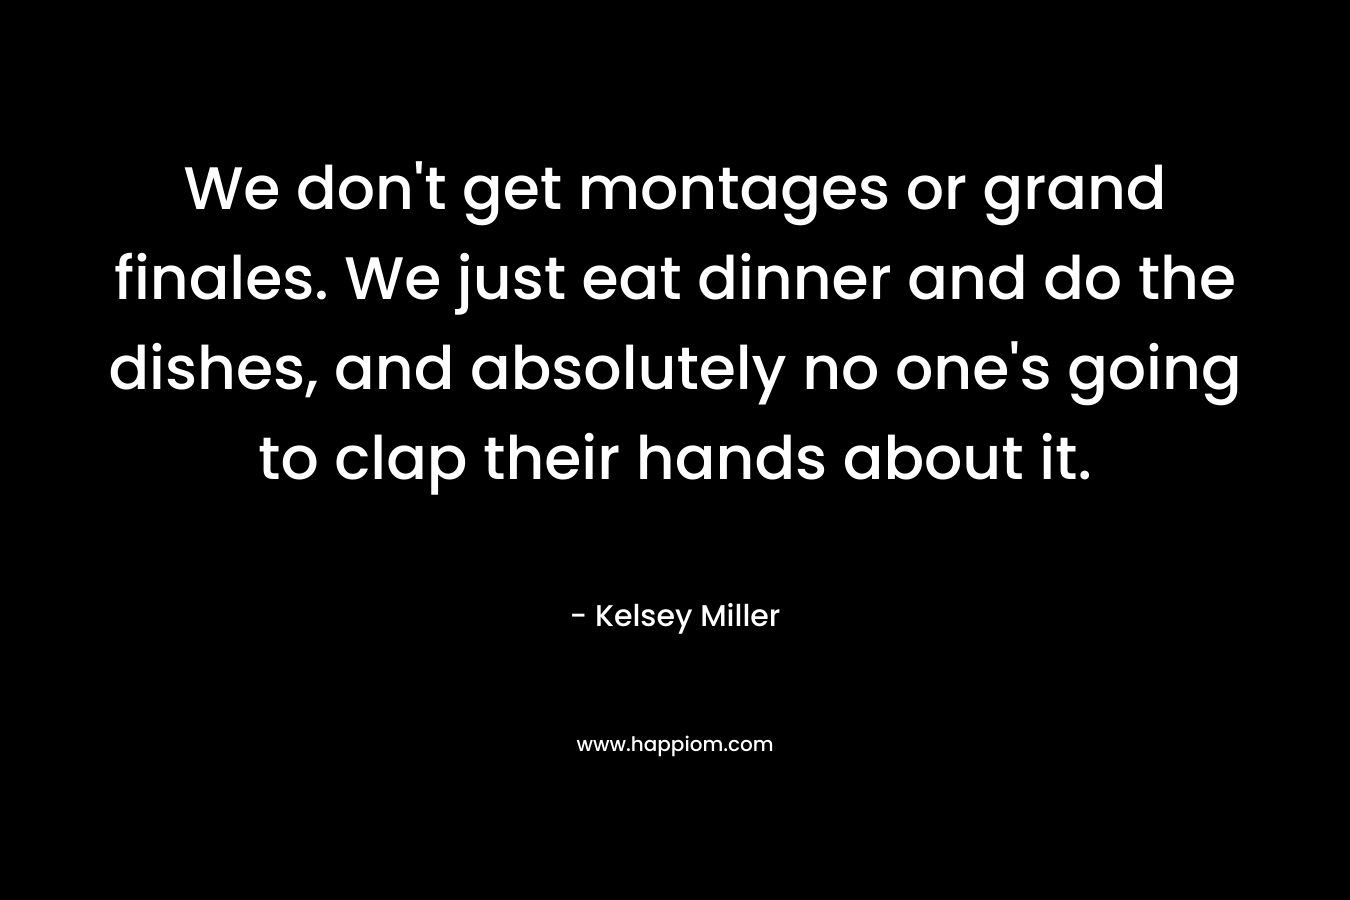 We don't get montages or grand finales. We just eat dinner and do the dishes, and absolutely no one's going to clap their hands about it.